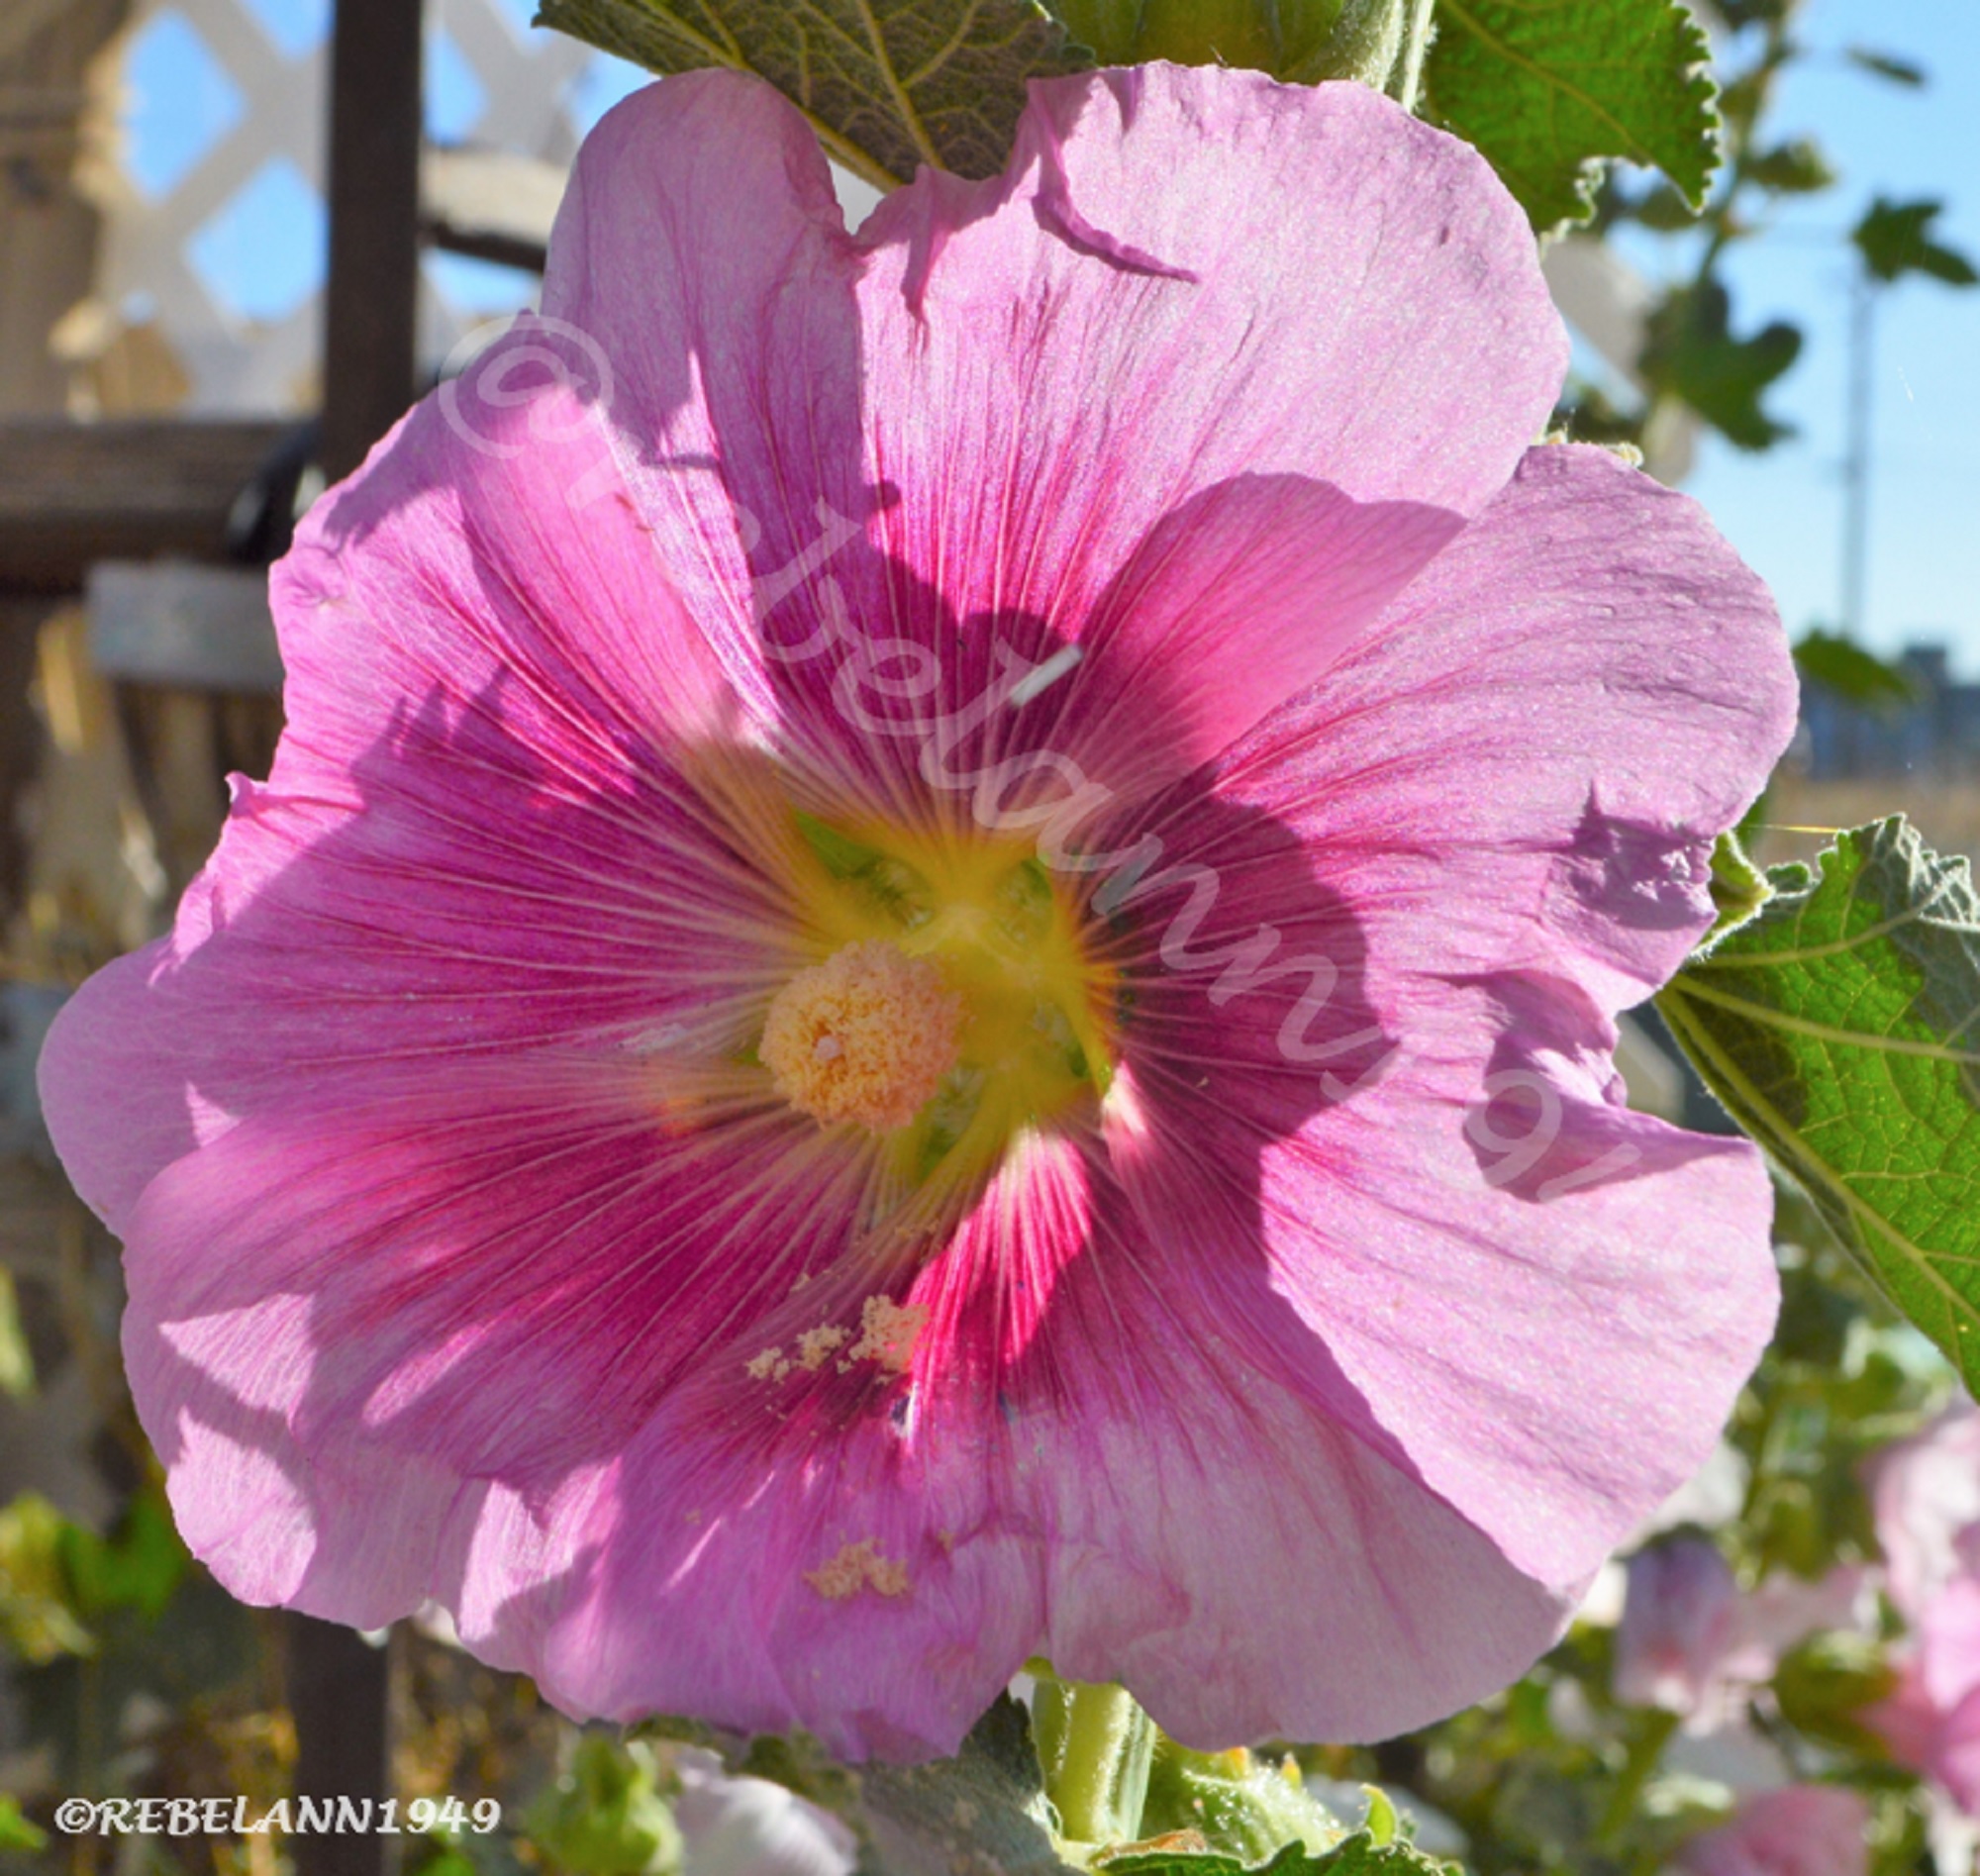 Hollyhock blooming May 2018, I took this shot a few days ago.